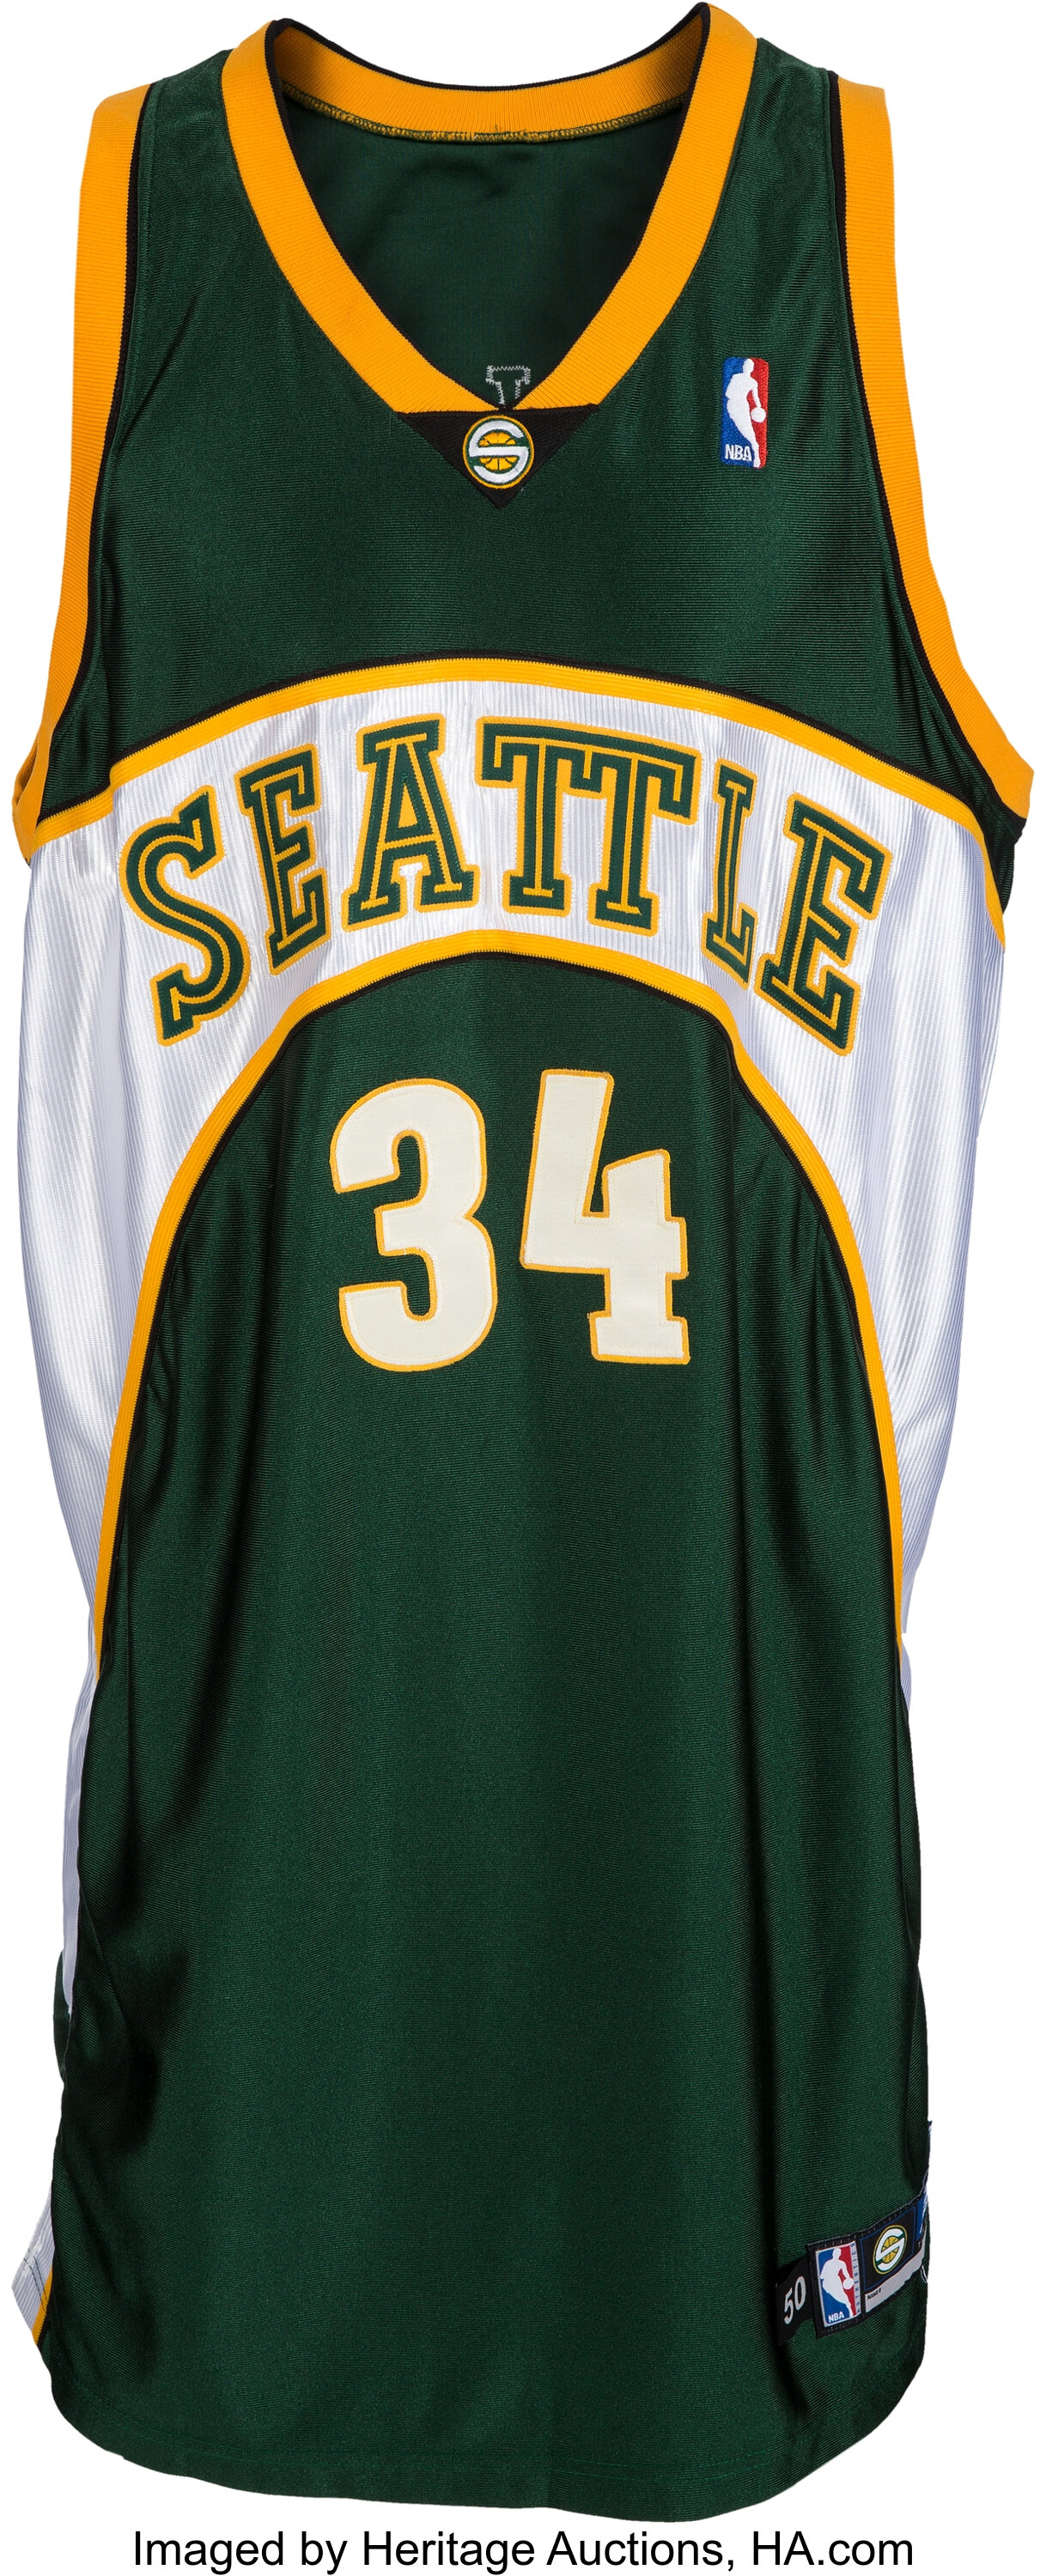 Ray Allen from The Seattle Supersonics  Jersey, Under armour store,  Basketball uniforms design